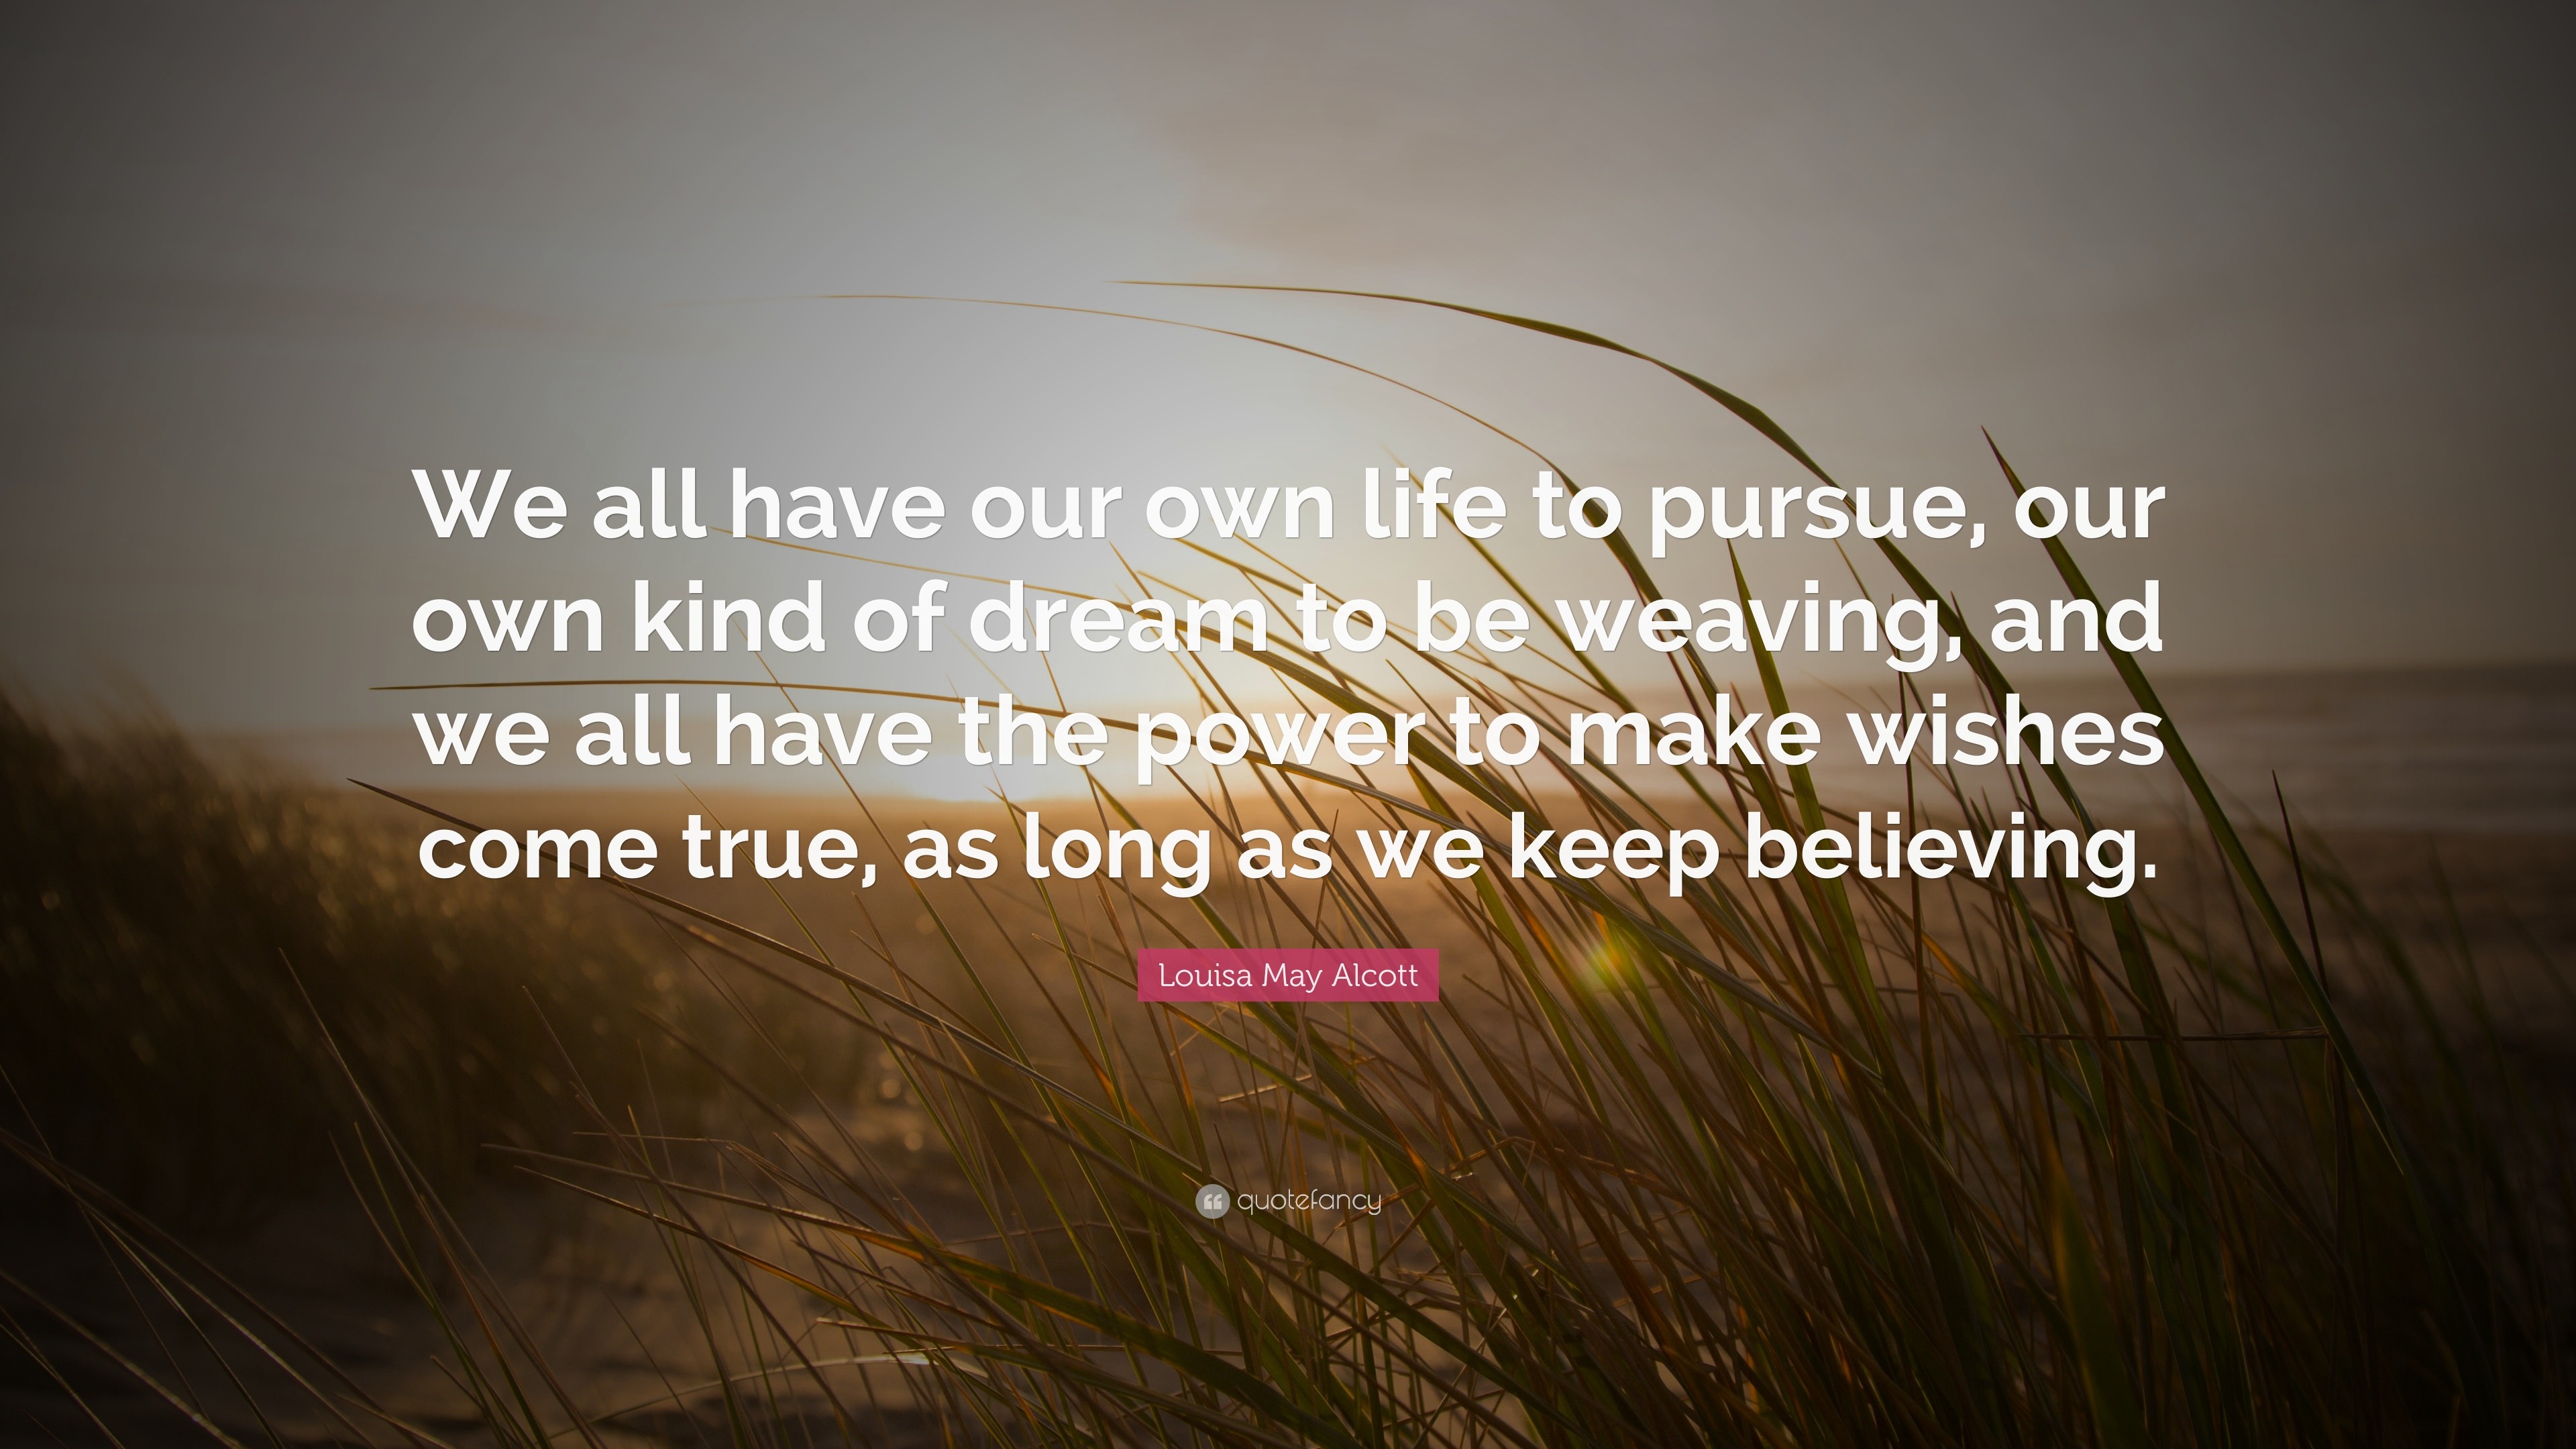 Louisa May Alcott Quote: “We all have our own life to pursue, our own ...